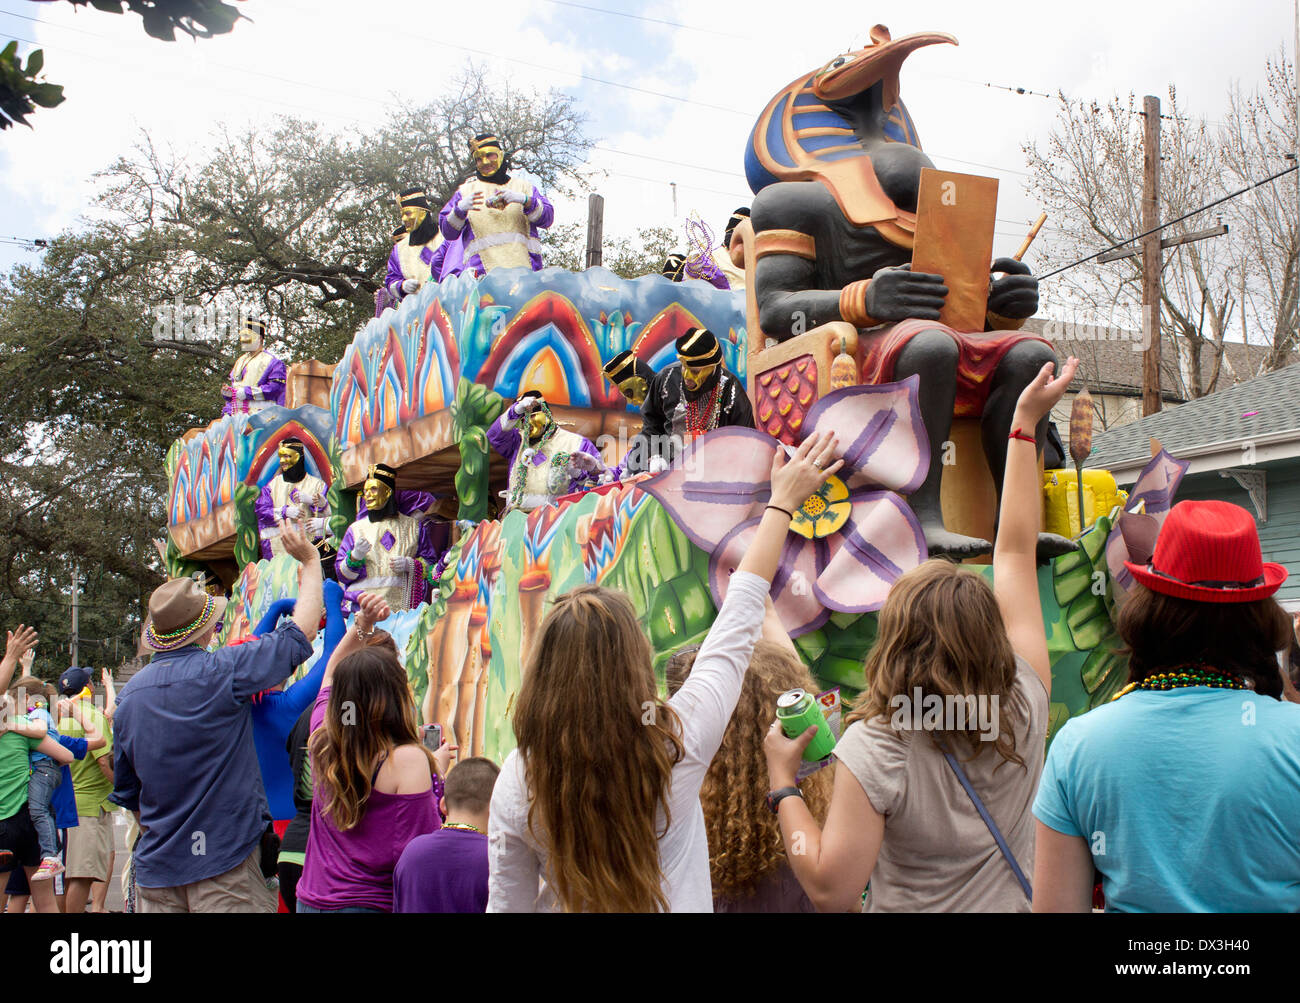 Egyptian cobra-themed float in a New Orleans Mardi Gras parade. Stock Photo